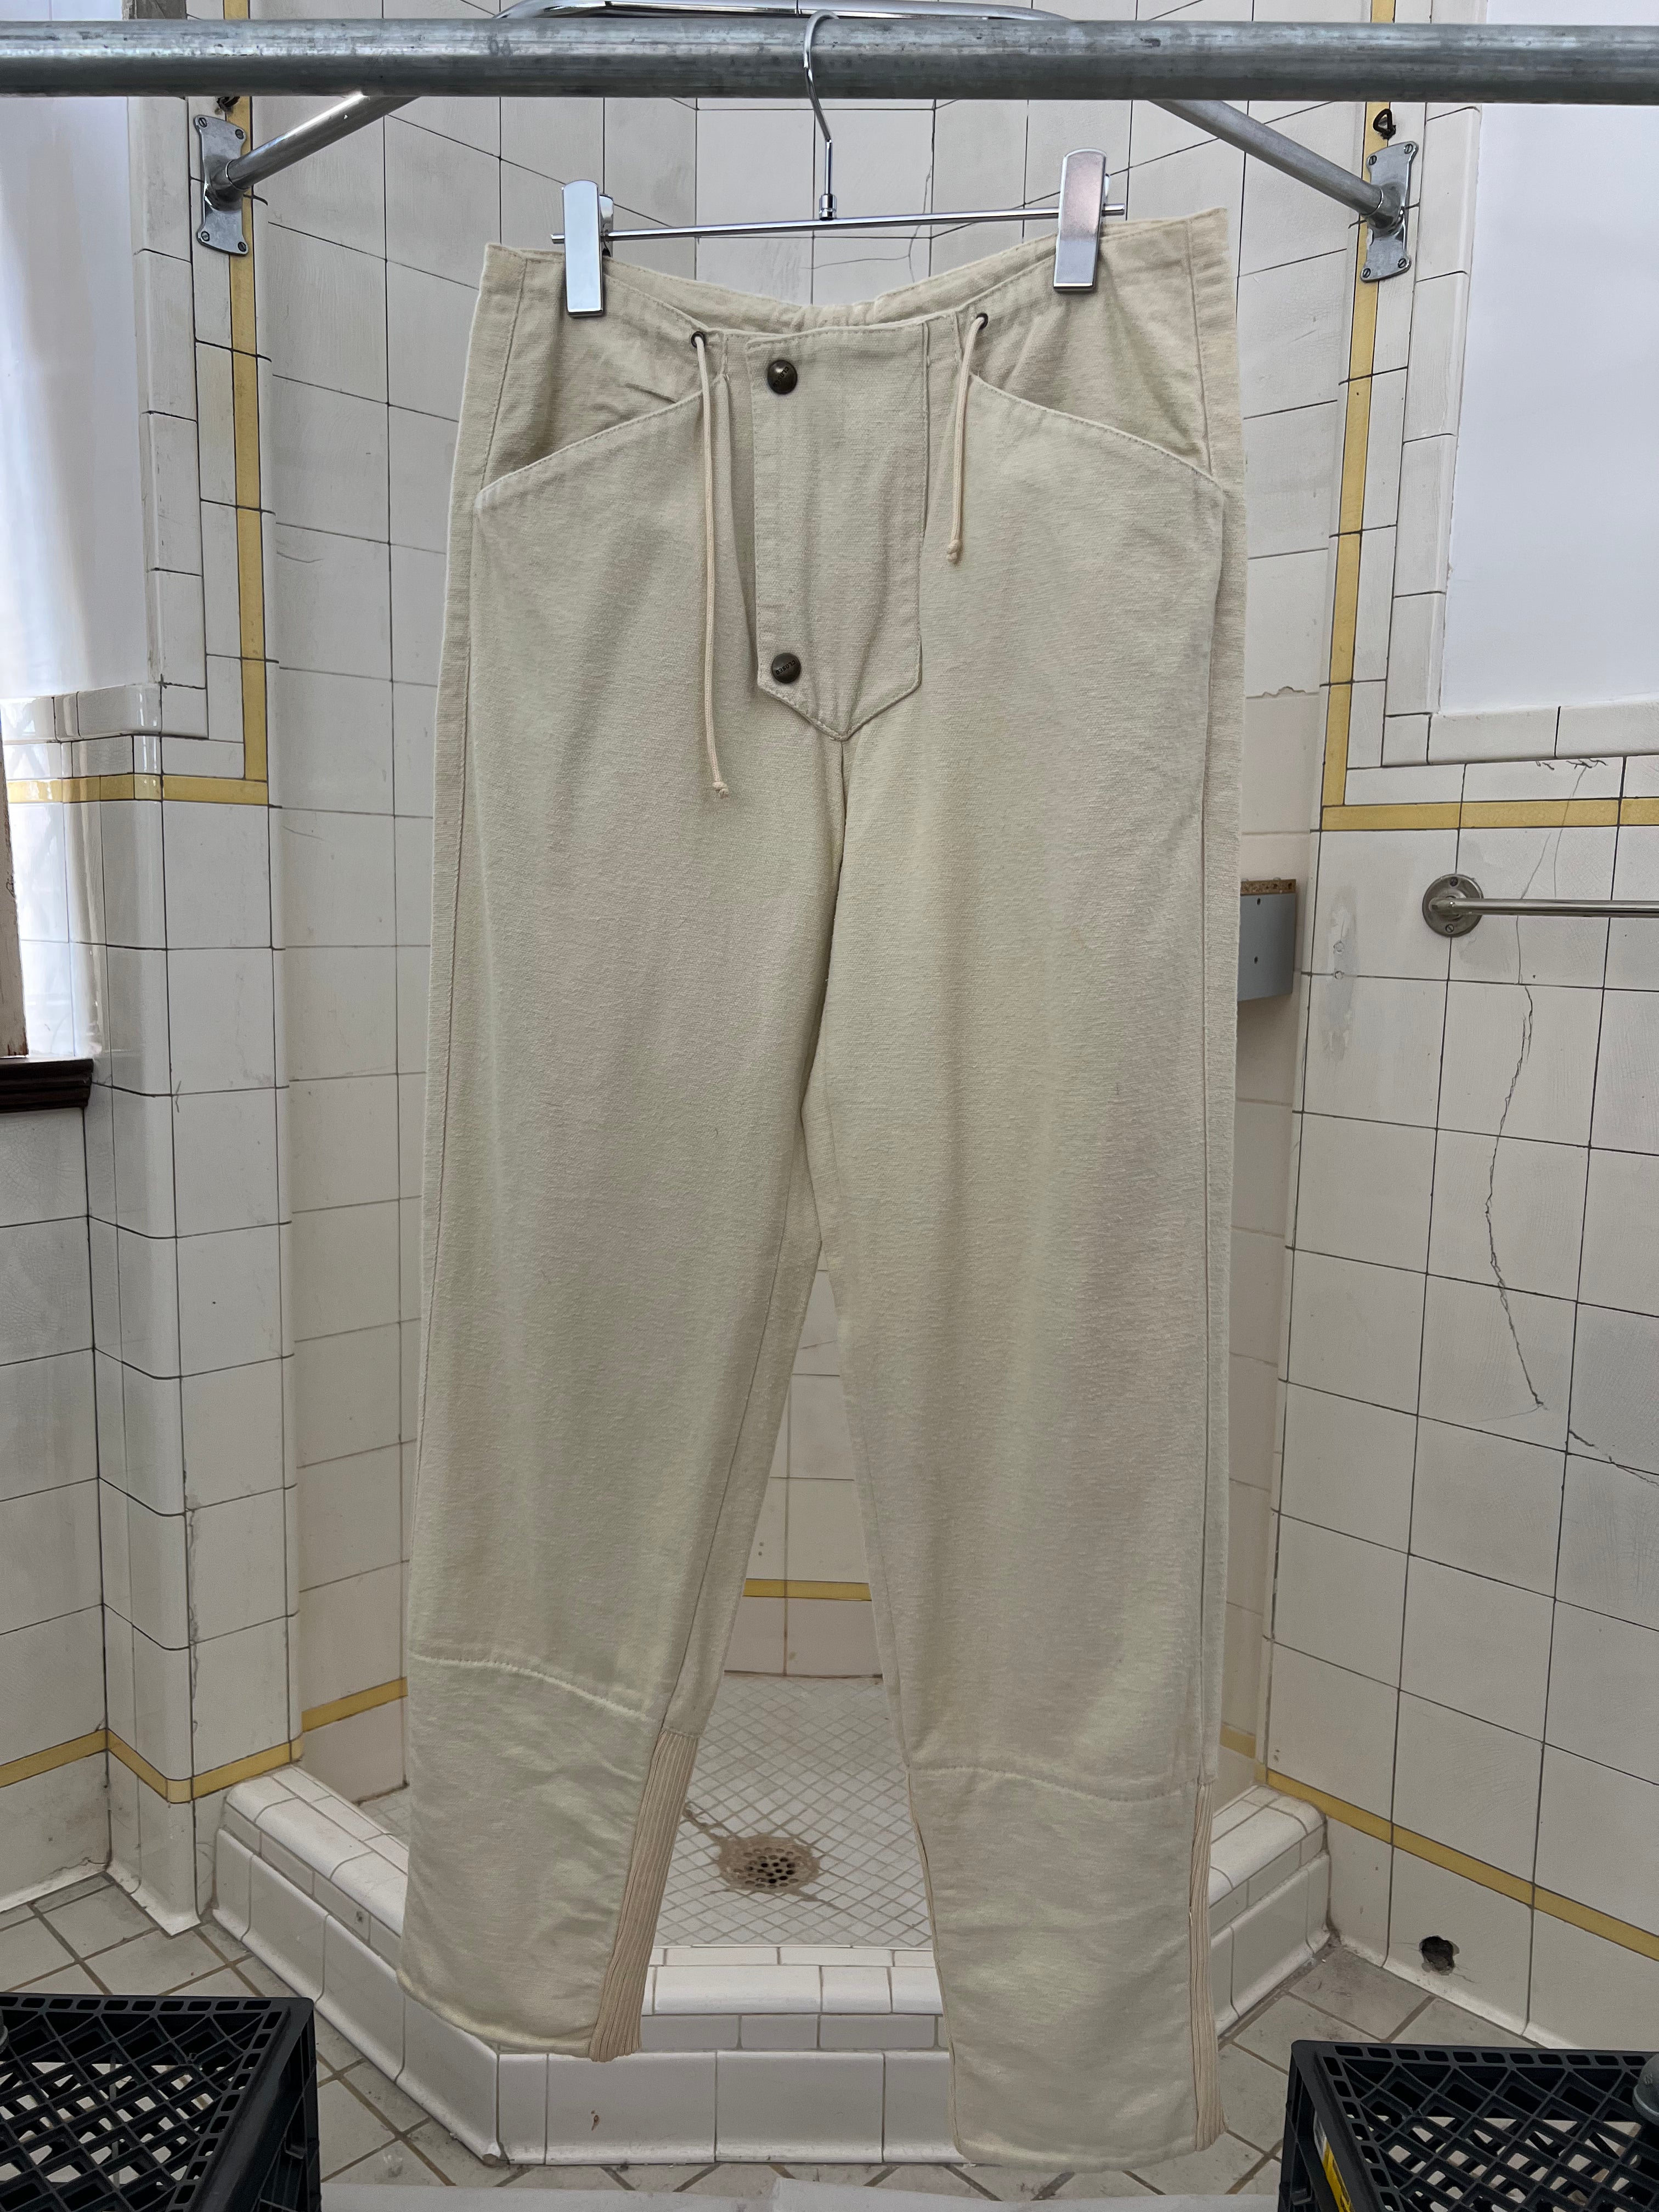 1980s Marithe Francois Girbaud x Closed Canvas Riding Pants - Size M